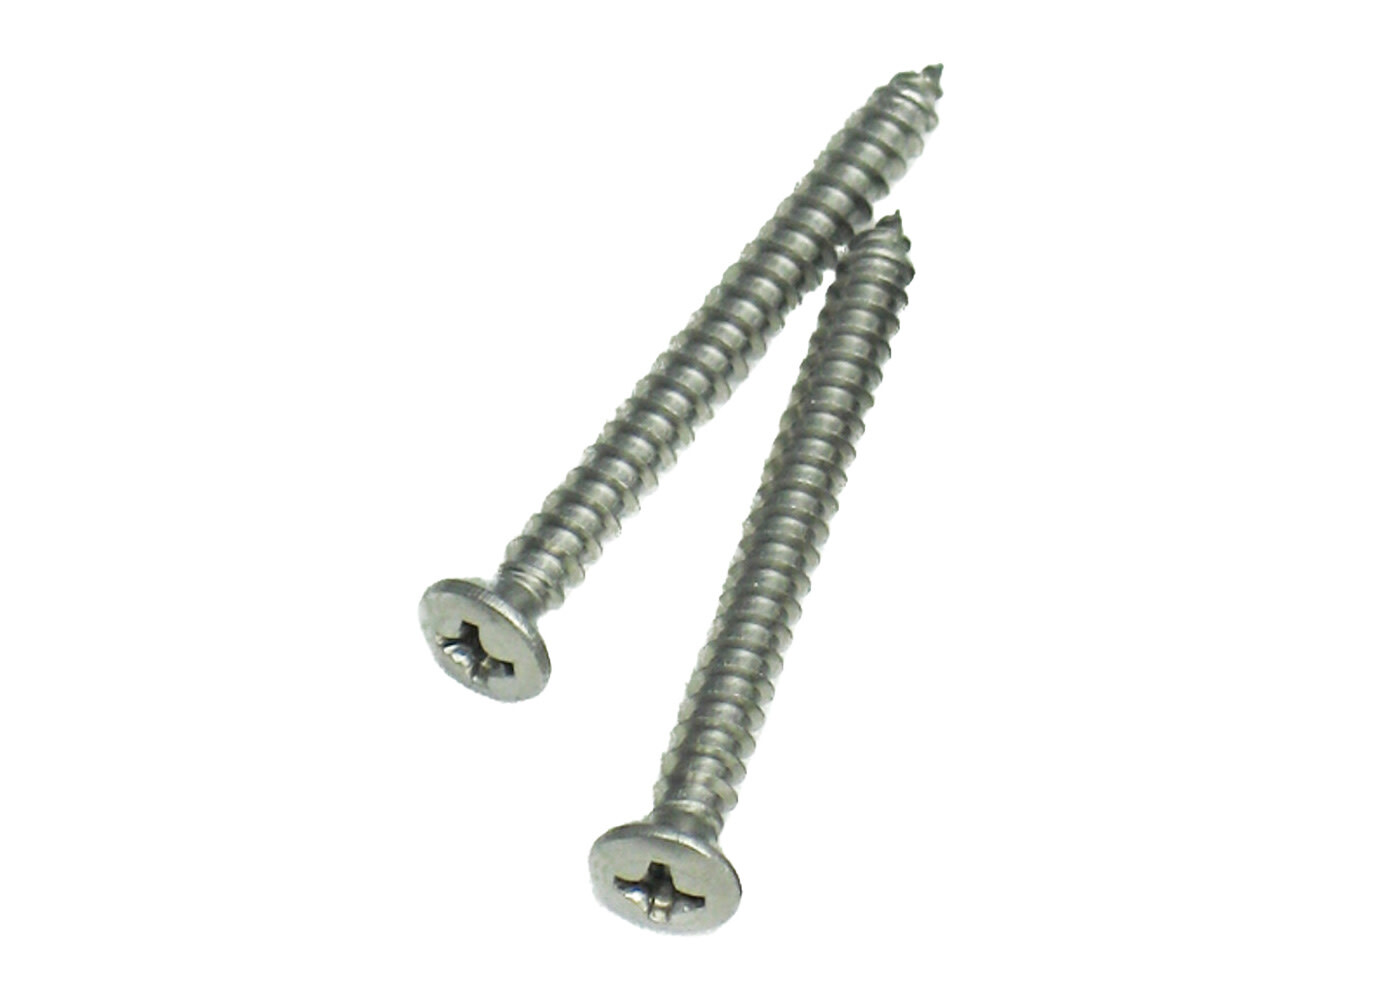 MannMade USA MannMade USA Strap Button Screw Set - Stainless Steel